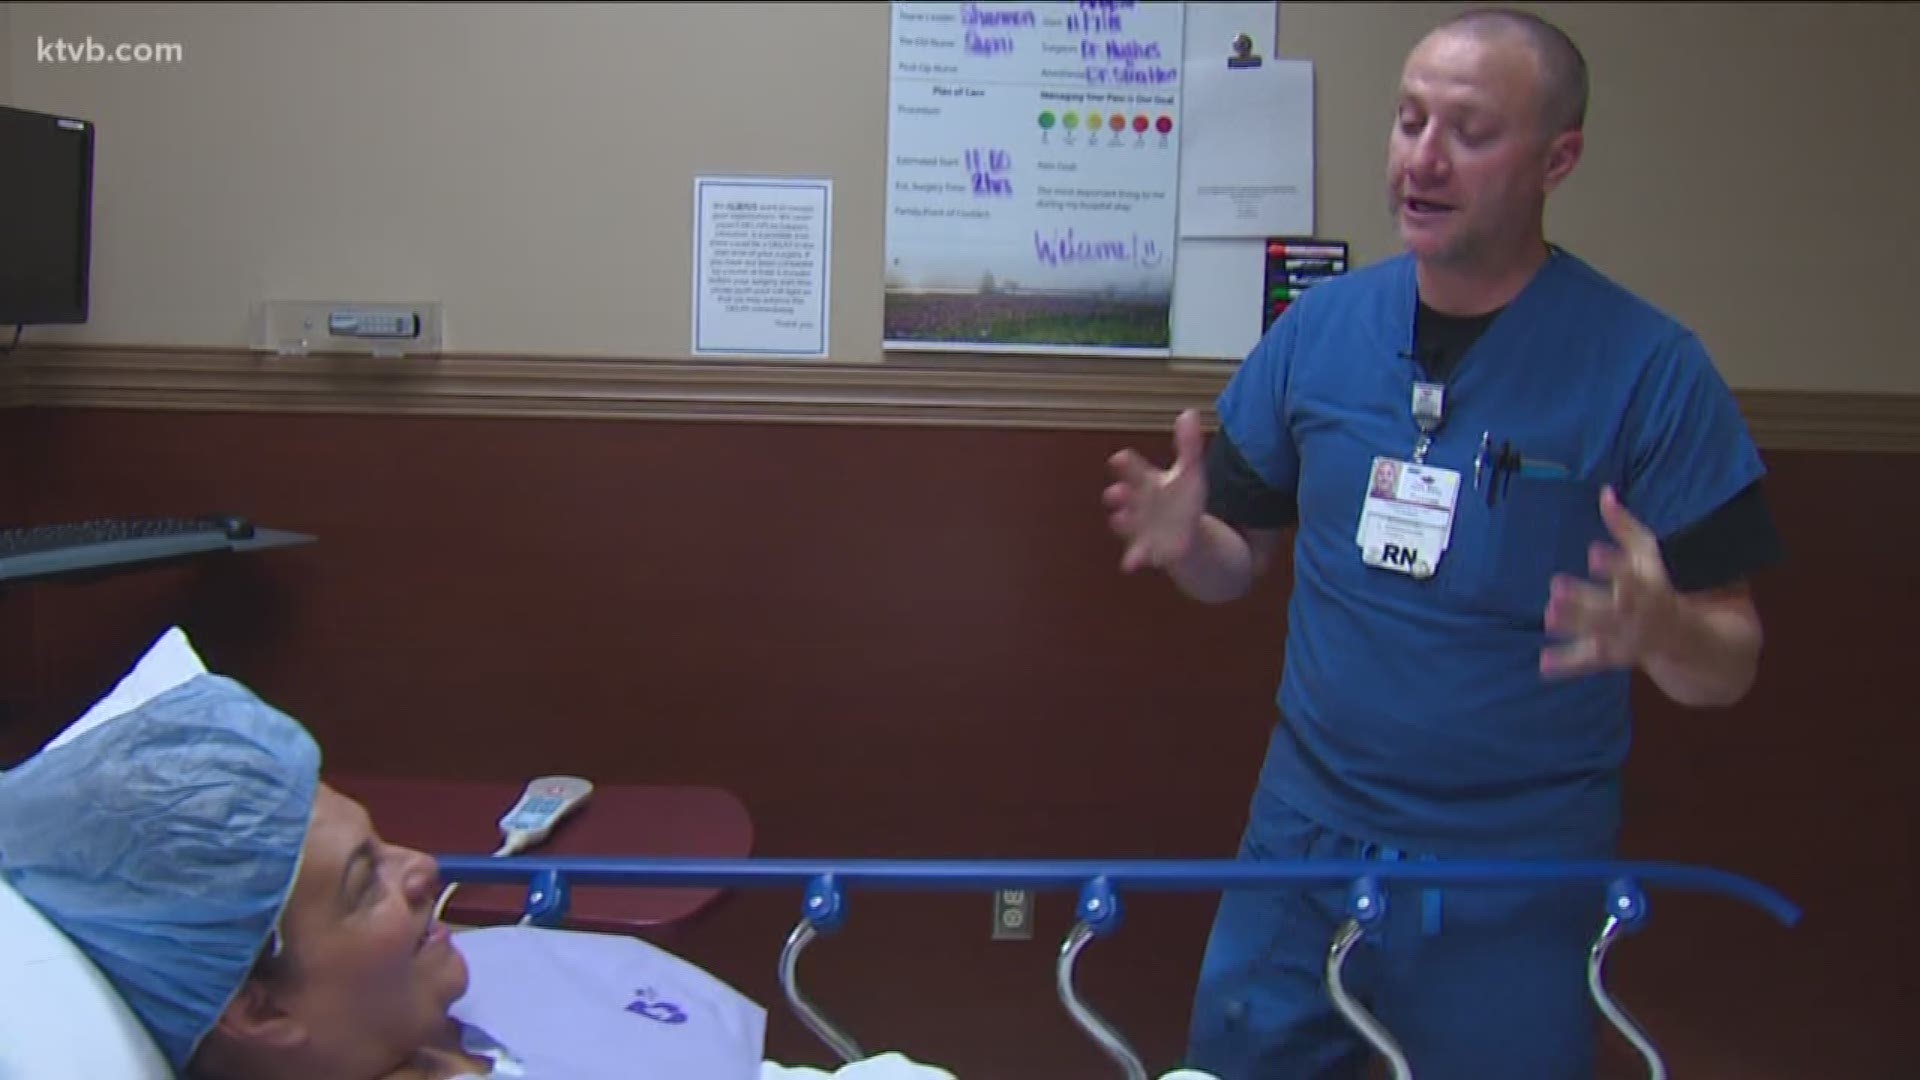 Video of Tommy Rushton singing for patients have gone viral on social media, and he has also been honored internationally as an extraordinary nurse.